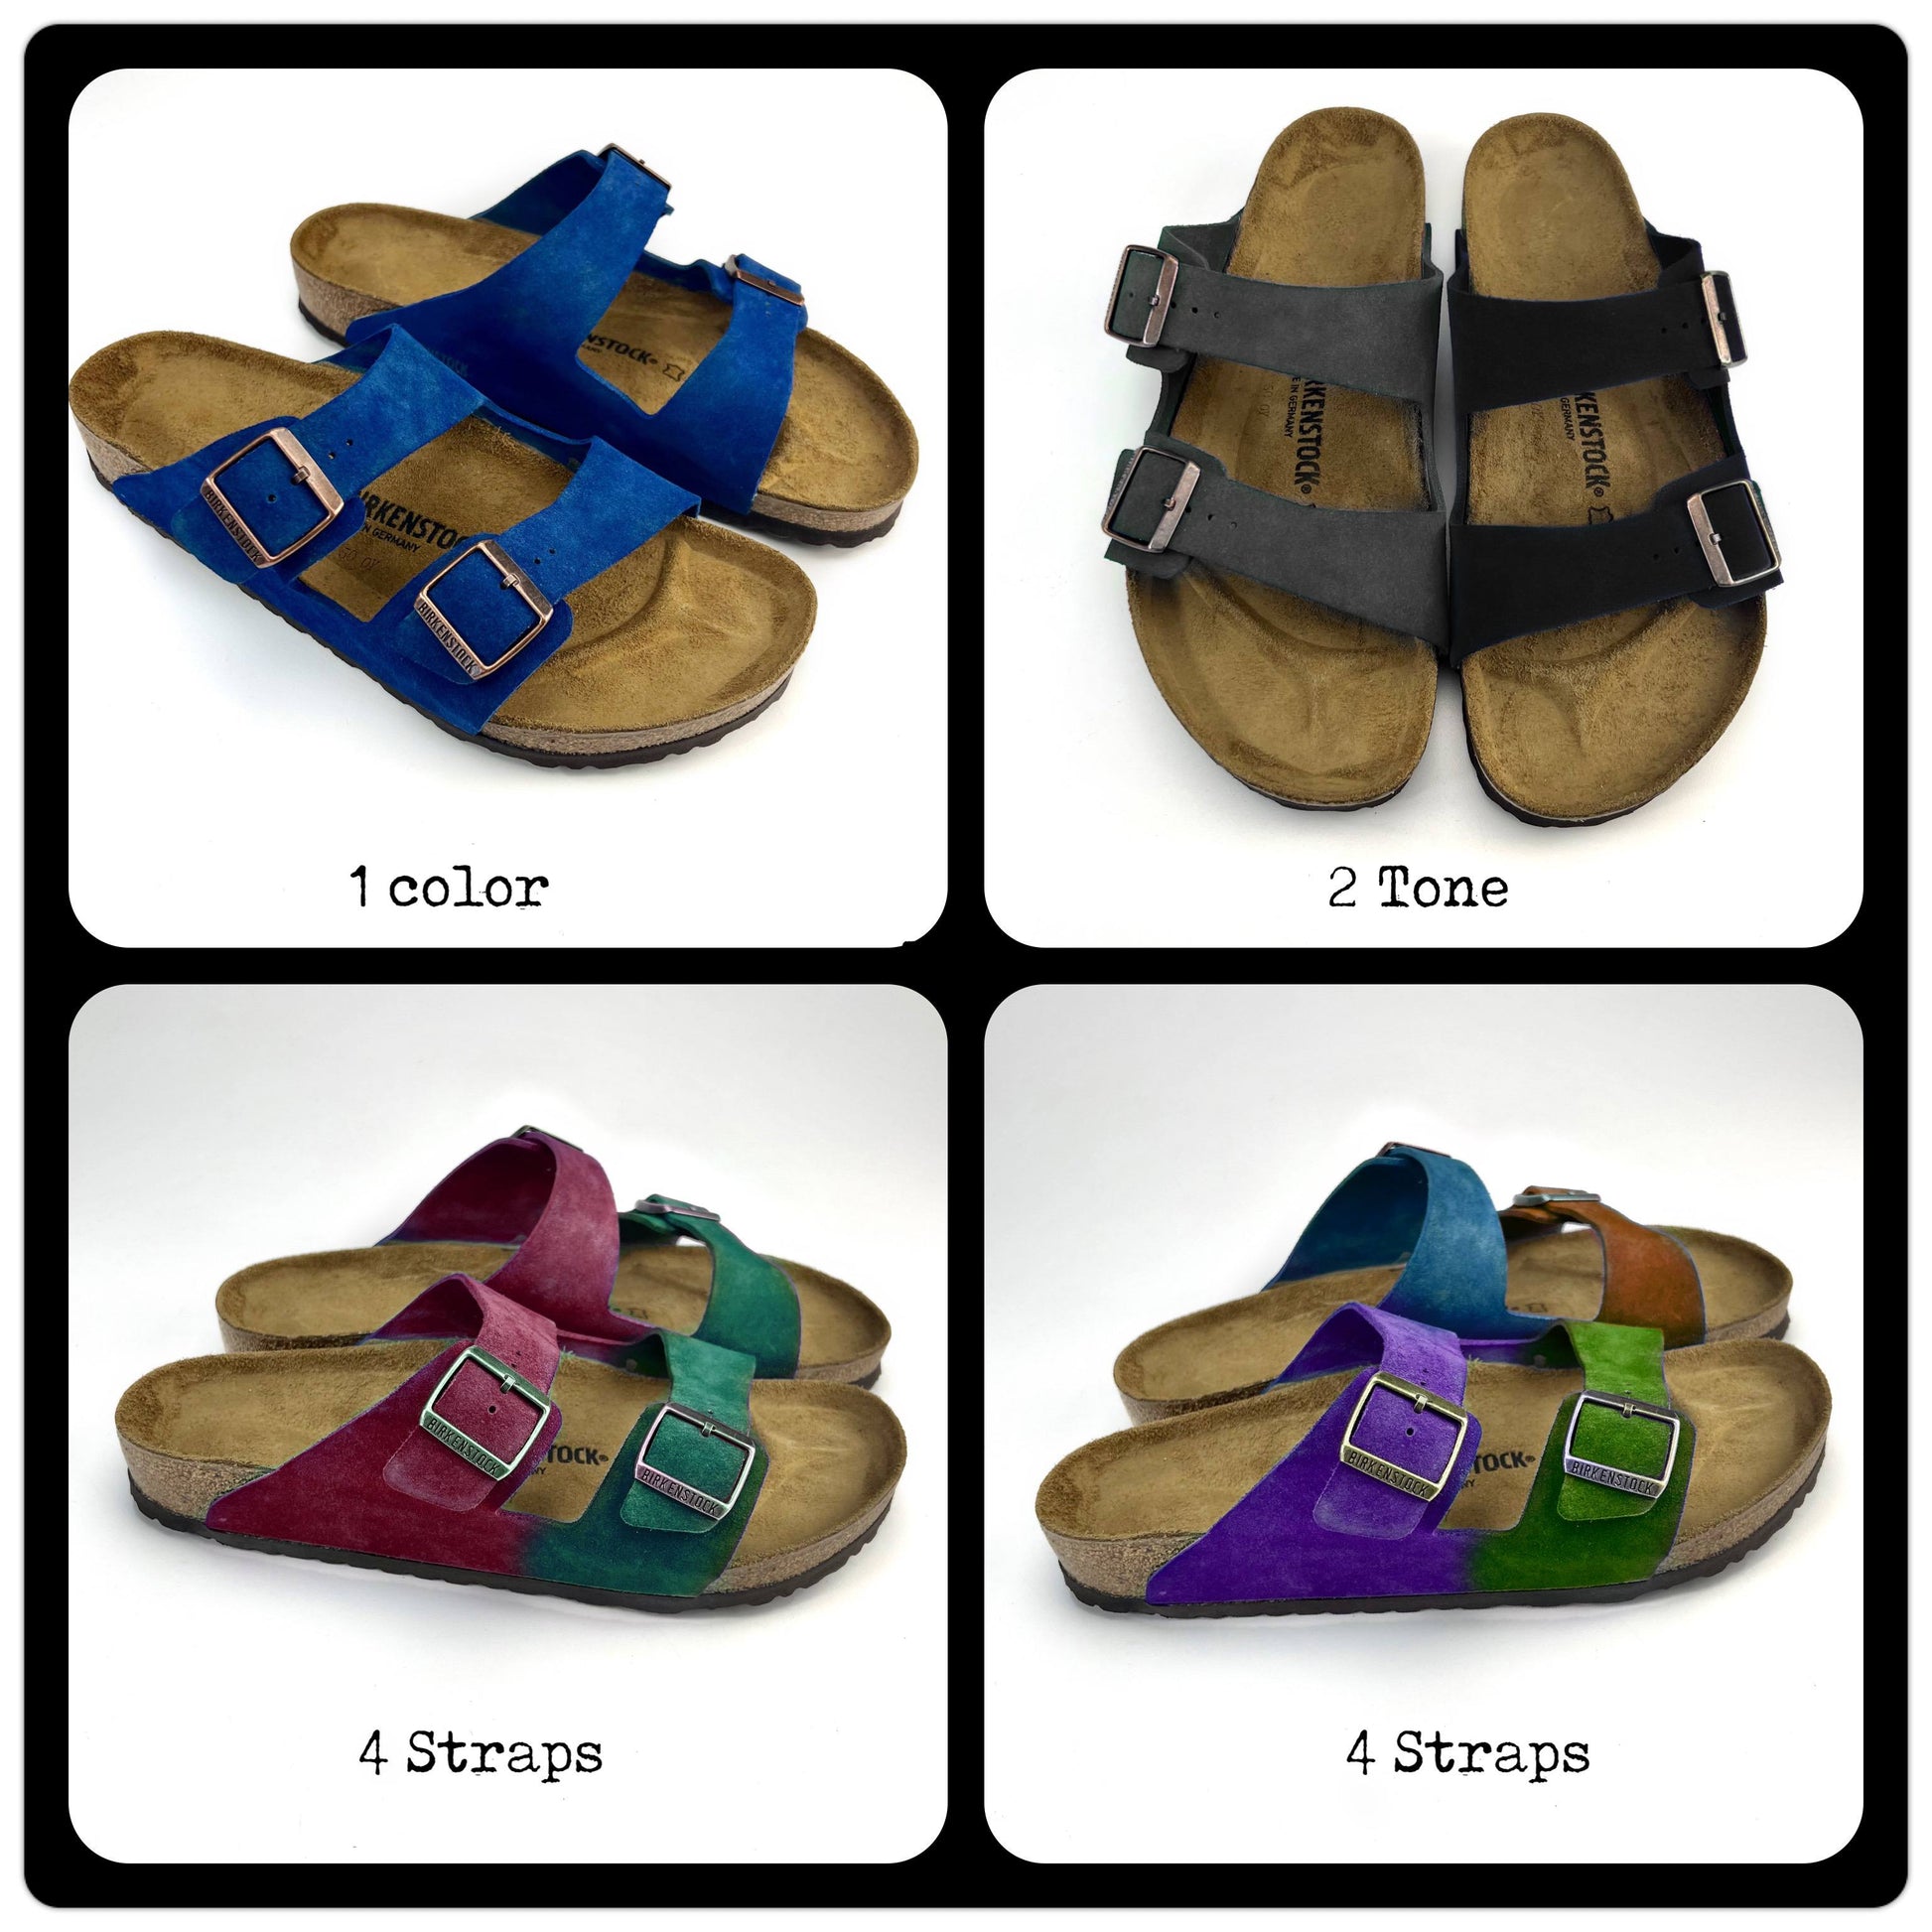 4 different pairs of Birkenstocks for a reference to choose color